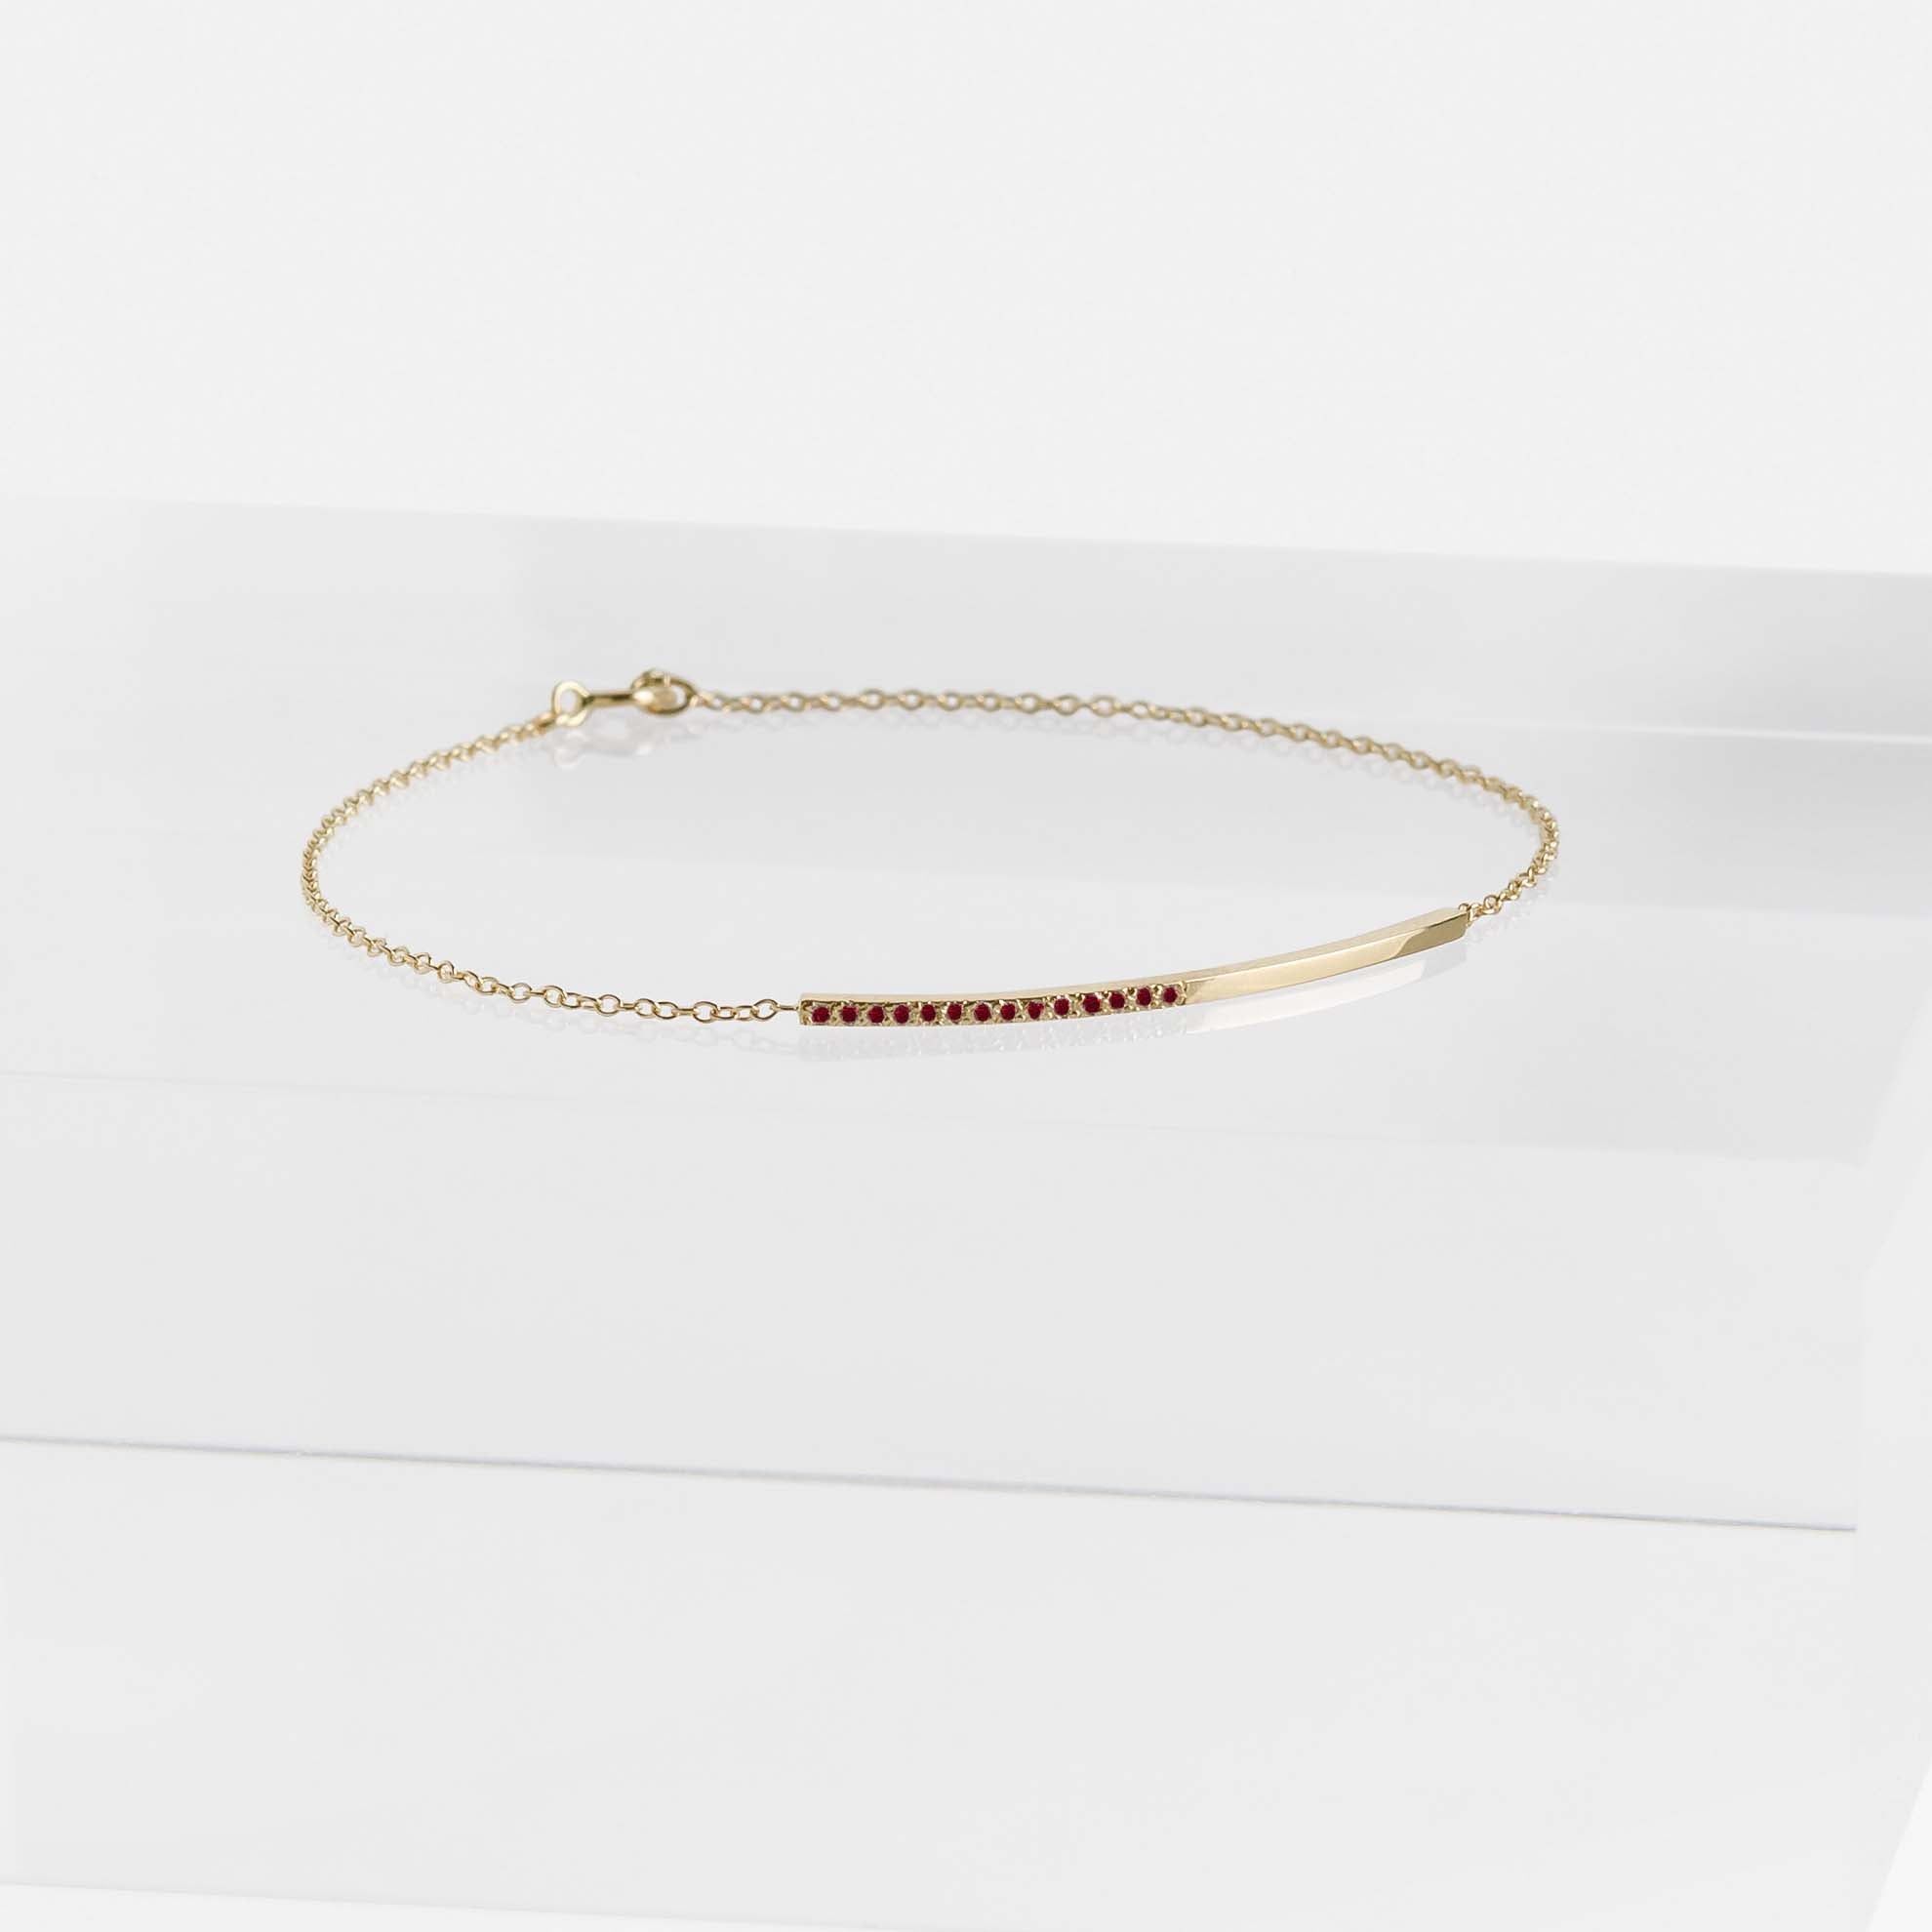 Iva Designer Bracelet in 14k Gold set with Rubies By SHW Fine Jewelry NYC